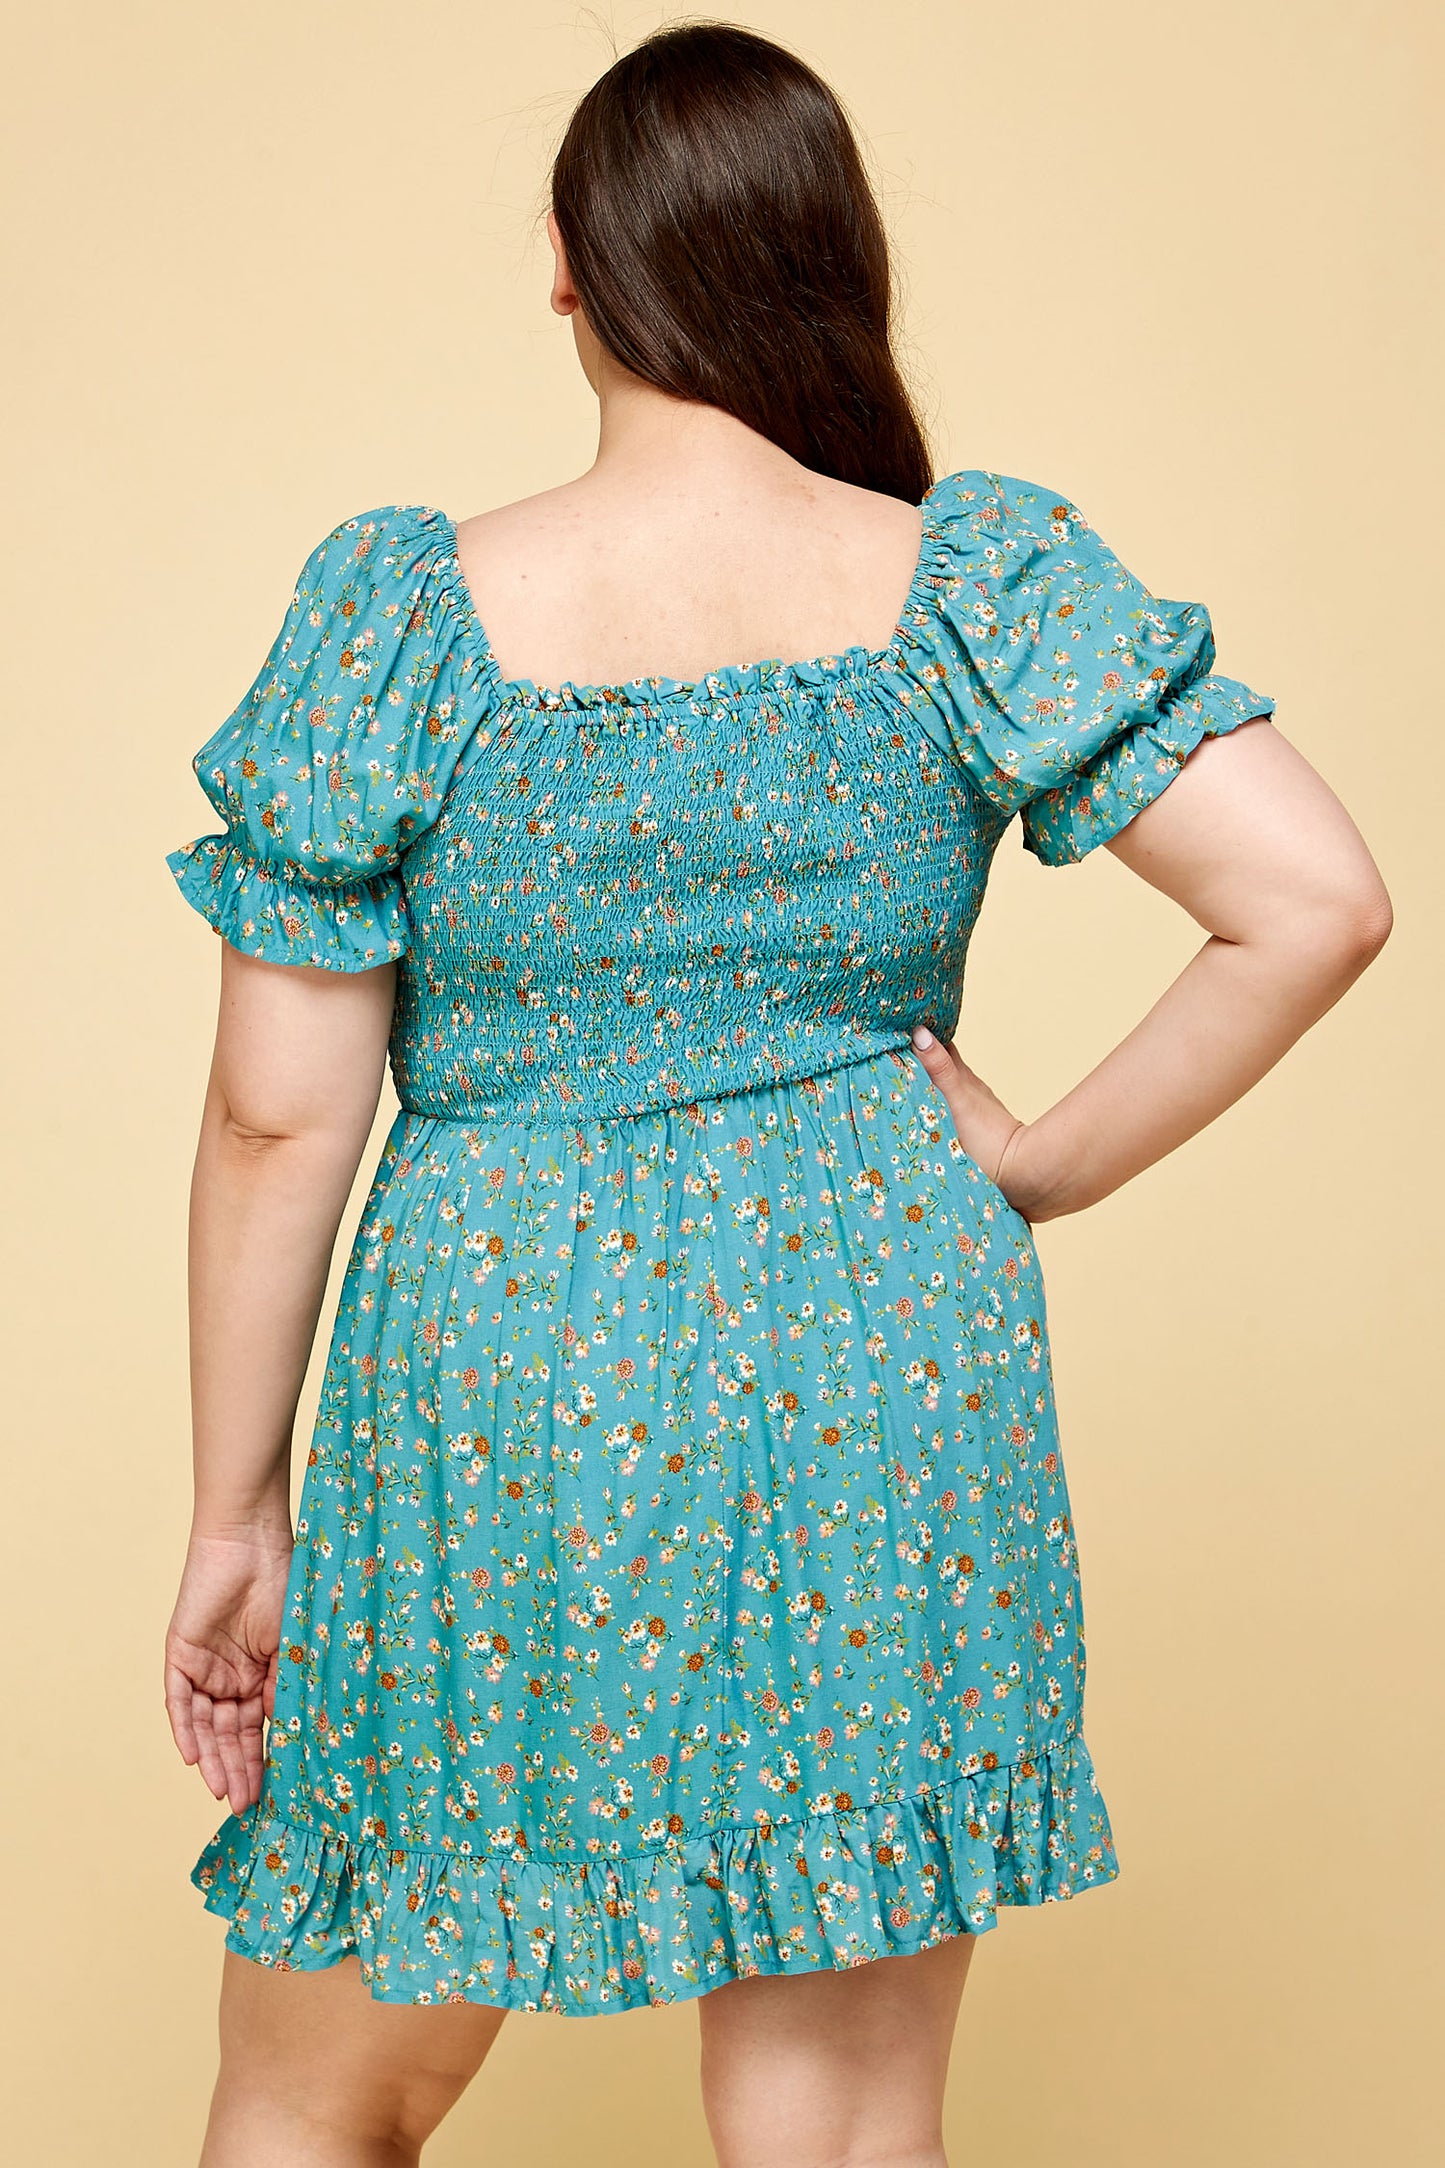 PLUS SIZE FLORAL BABYDOLL DRESS IN TEAL